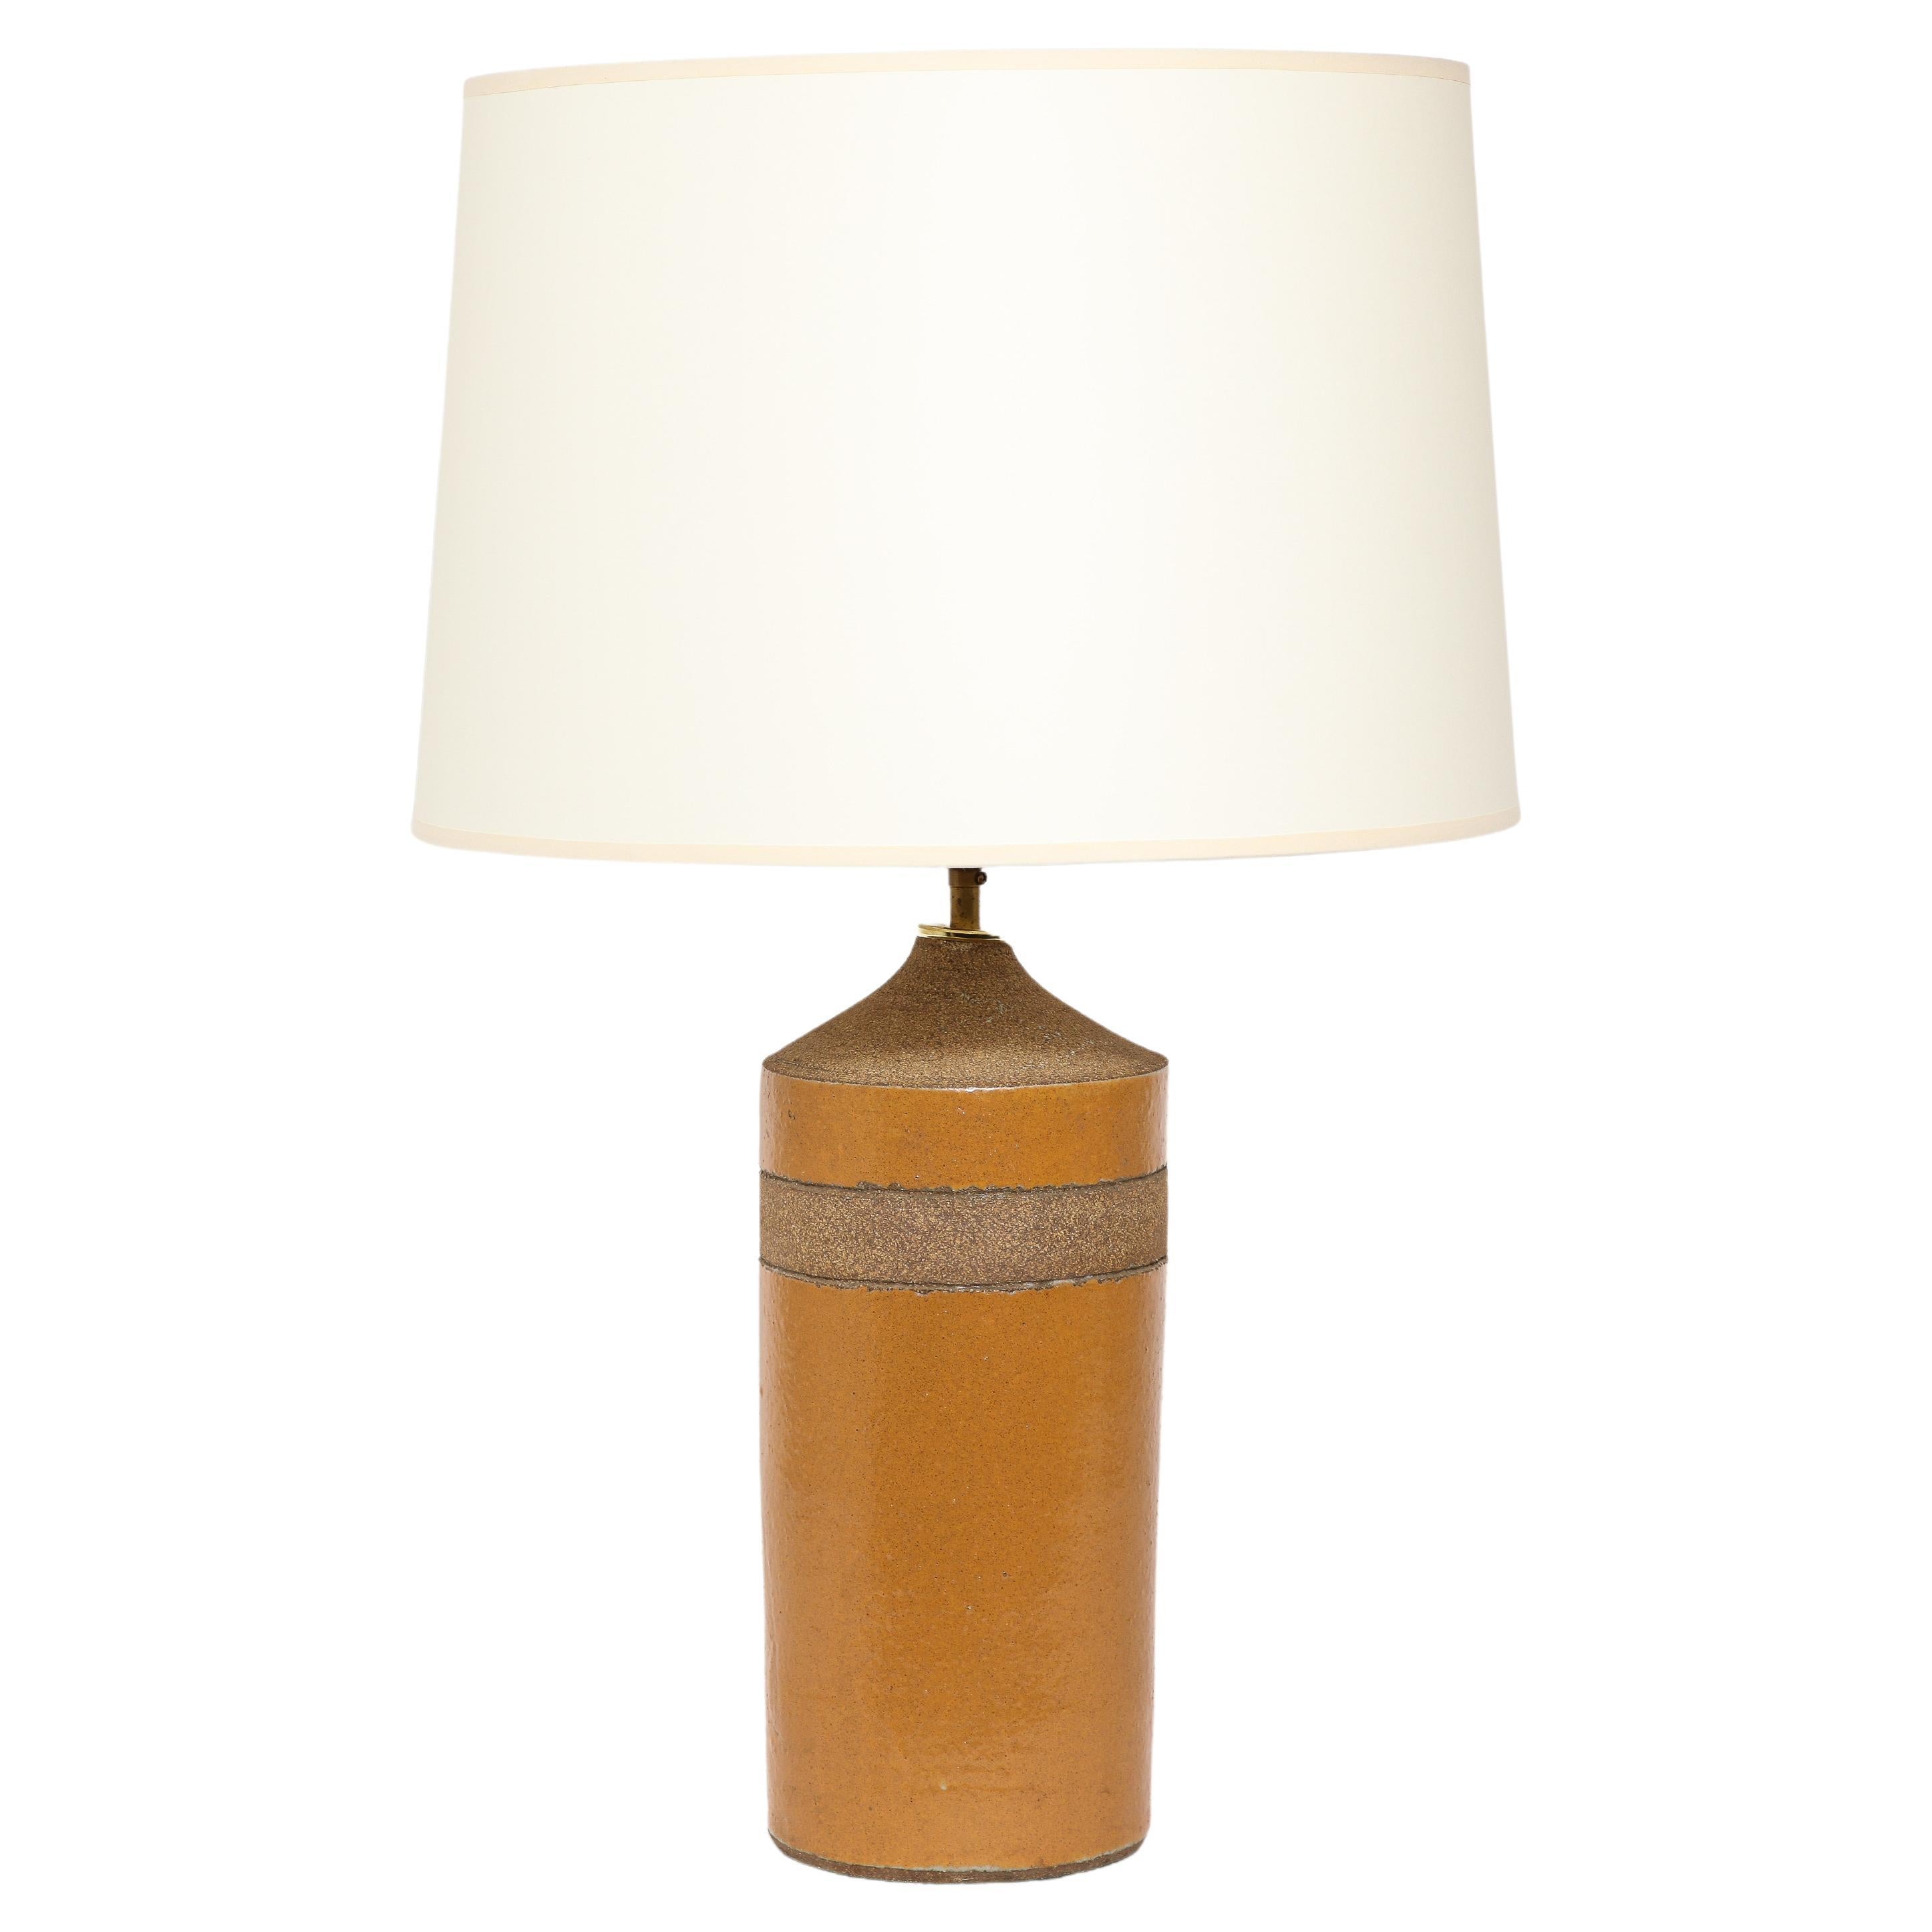 Brent Bennet Brown Ceramic Table lamp, USA 1960's